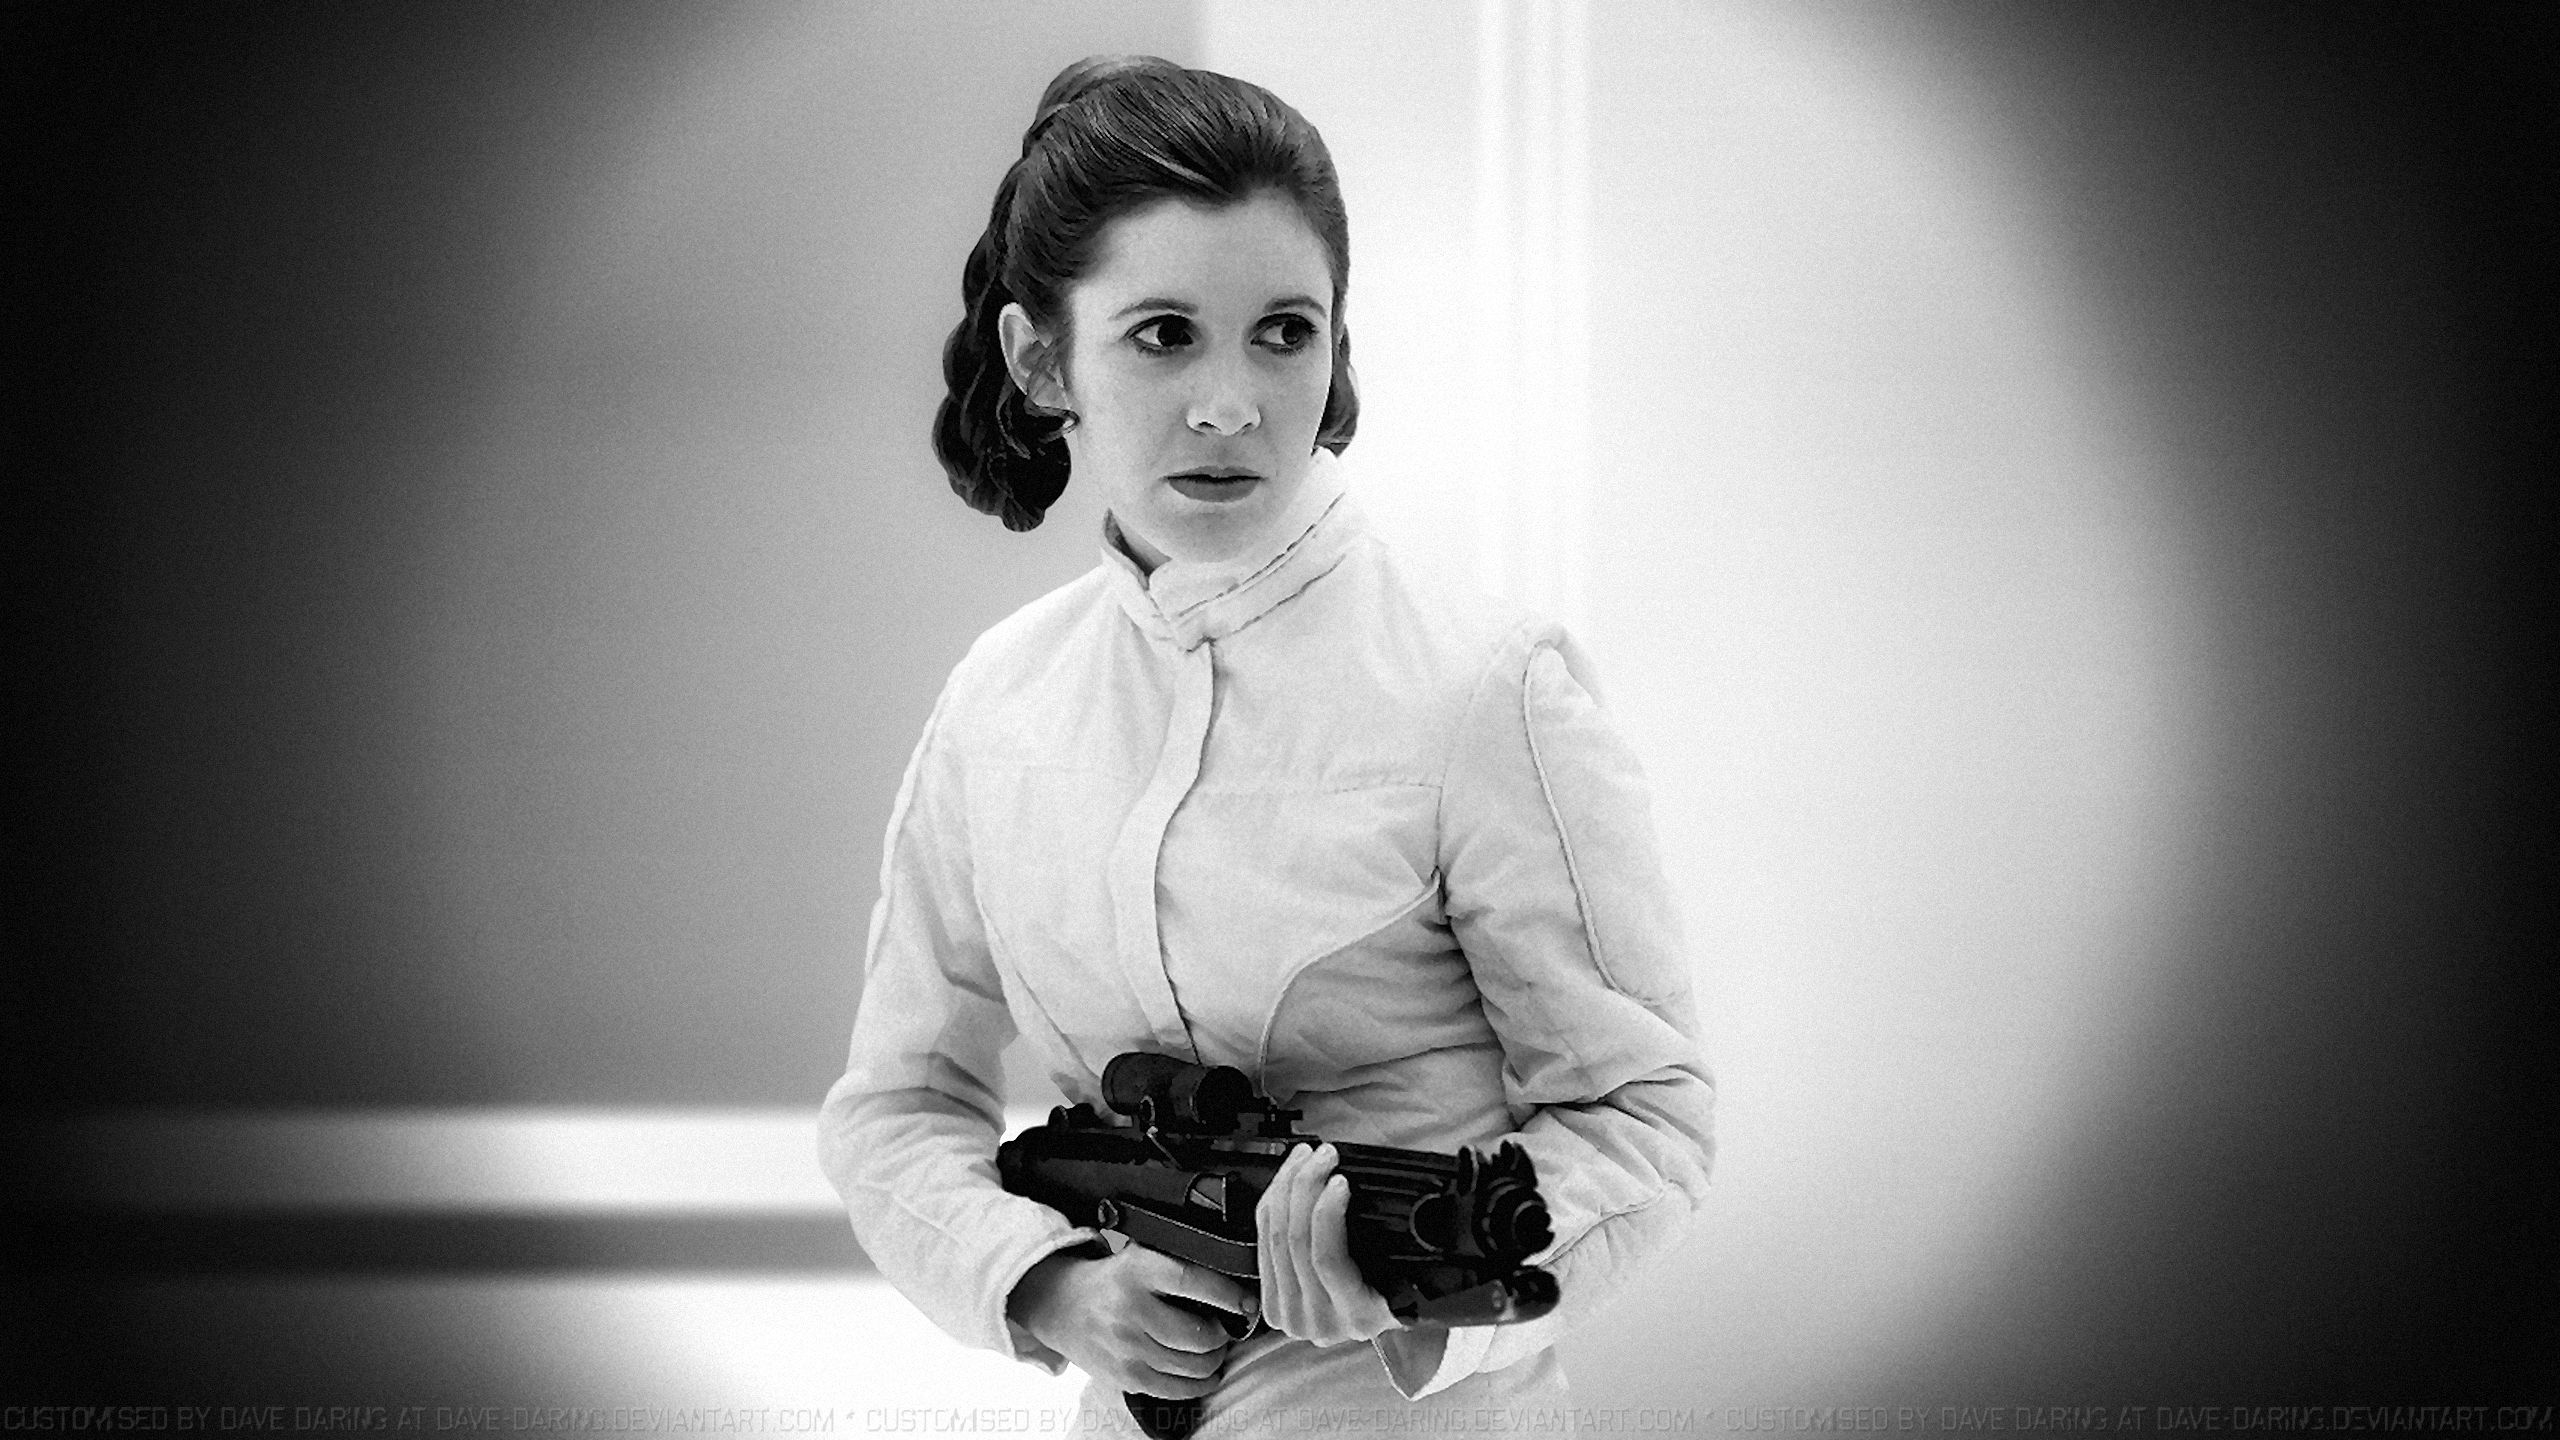 Carrie Fisher Princess Leia XVI by Dave Daring on DeviantArt